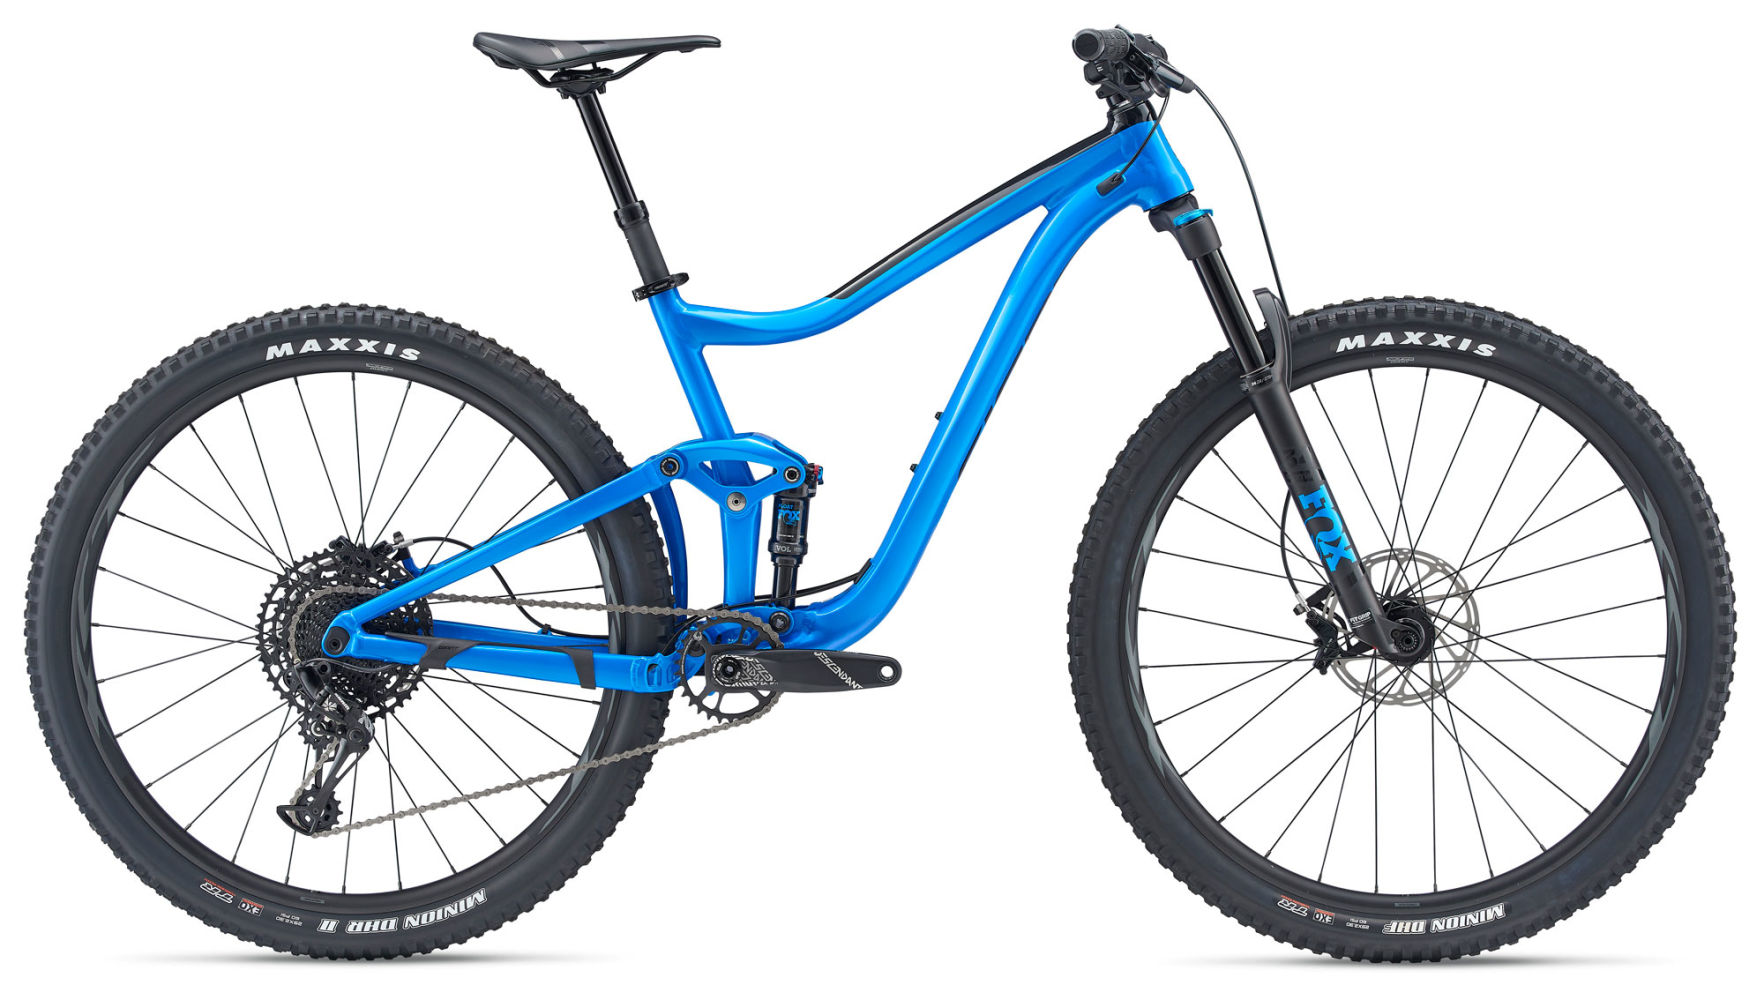 Giant rolls back on 29" wheels with all new Trance Advanced Pro 29 & Trance 29